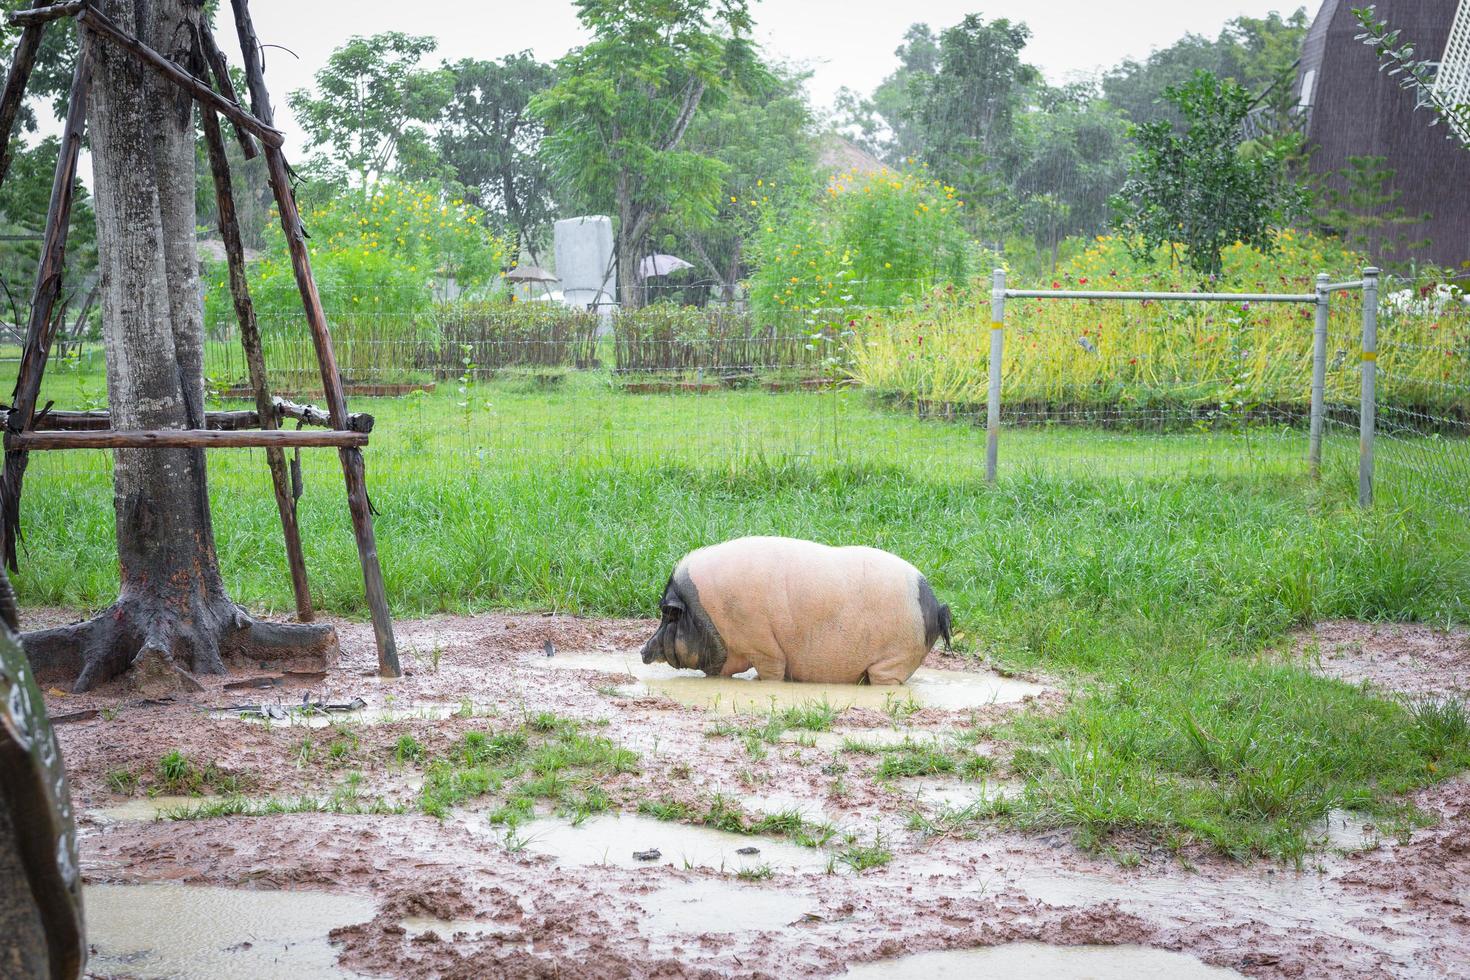 One pig, white and black, was comfortably standing in a muddy pit on a rainy day. photo